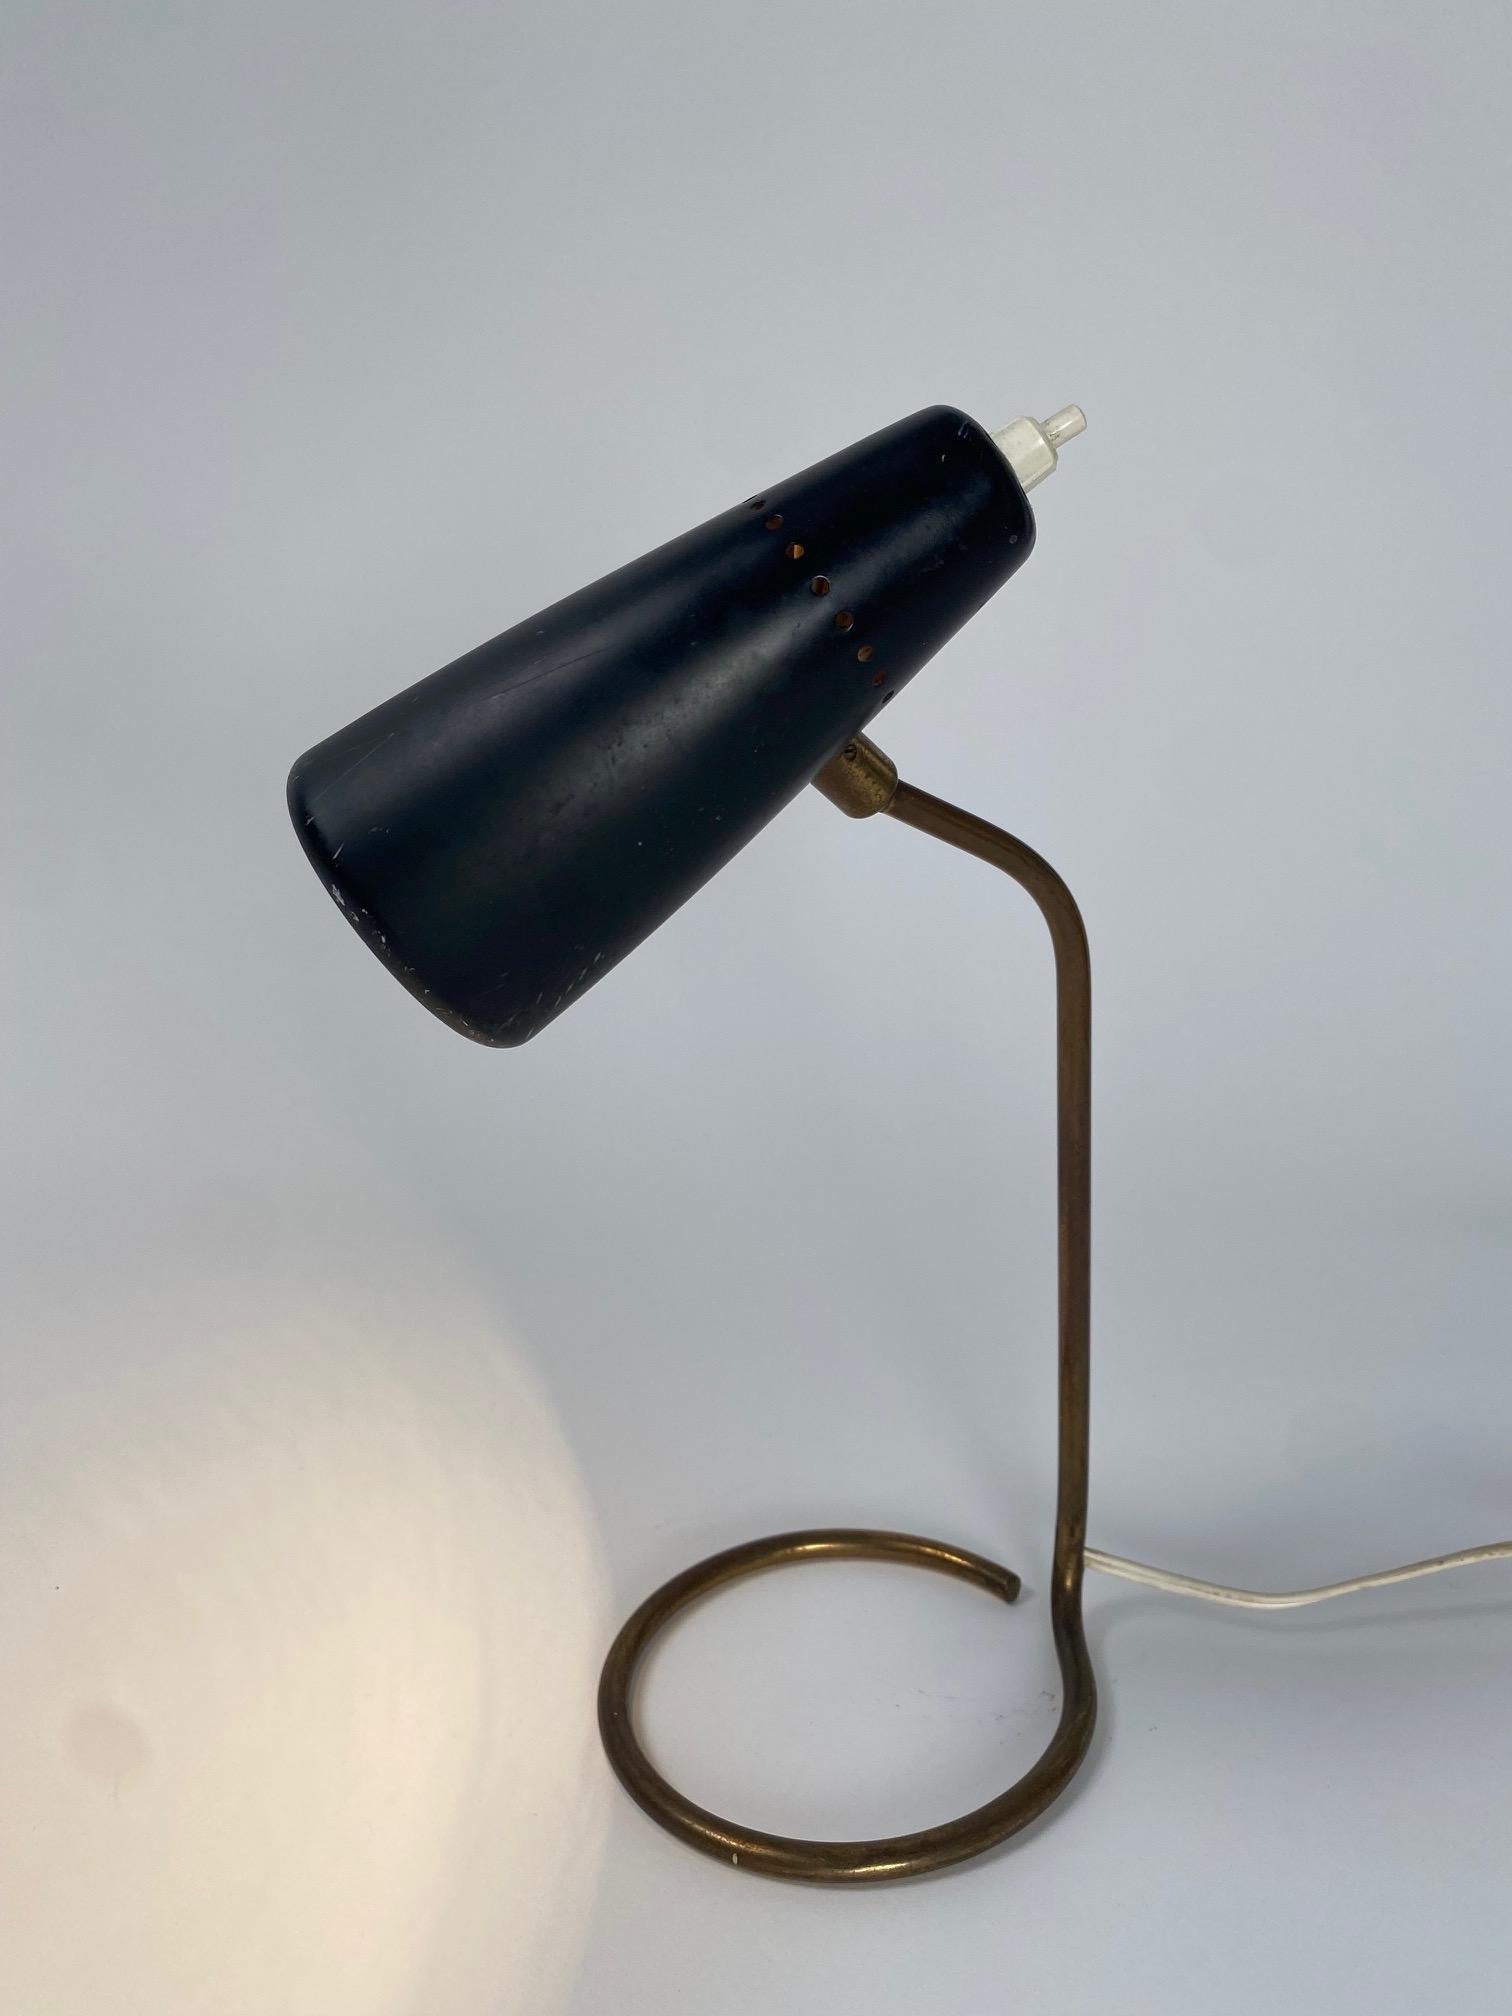 Original Stilnovo table lamp, Italy, 1950s design

It is a rare and refined table lamp, which well expresses the sophisticated elegance of the well-known Italian company. The label is located inside the lampshade